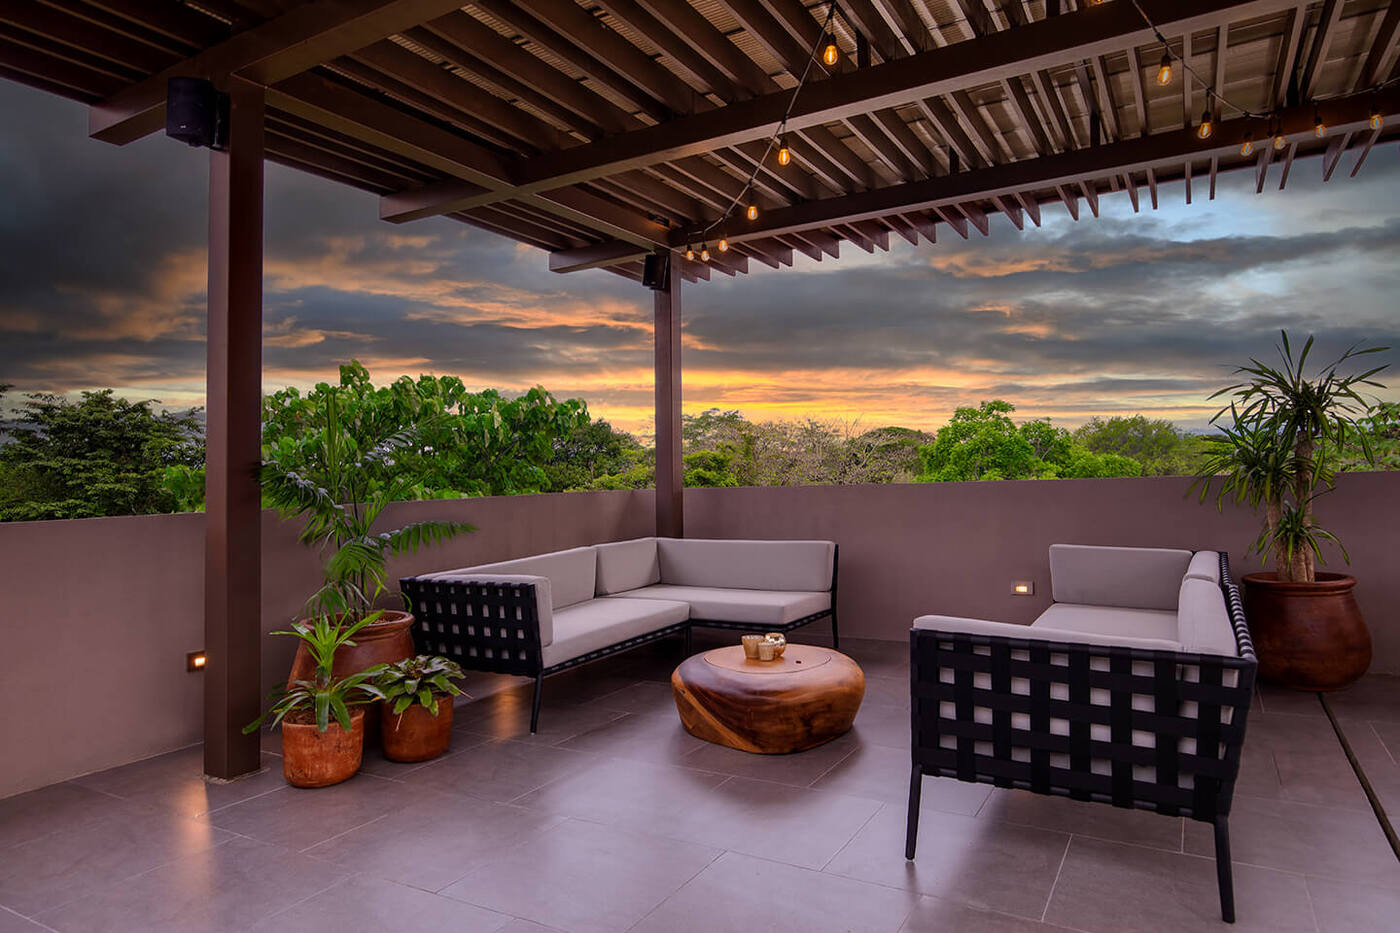 Patio with seating, tbale, views of sunset